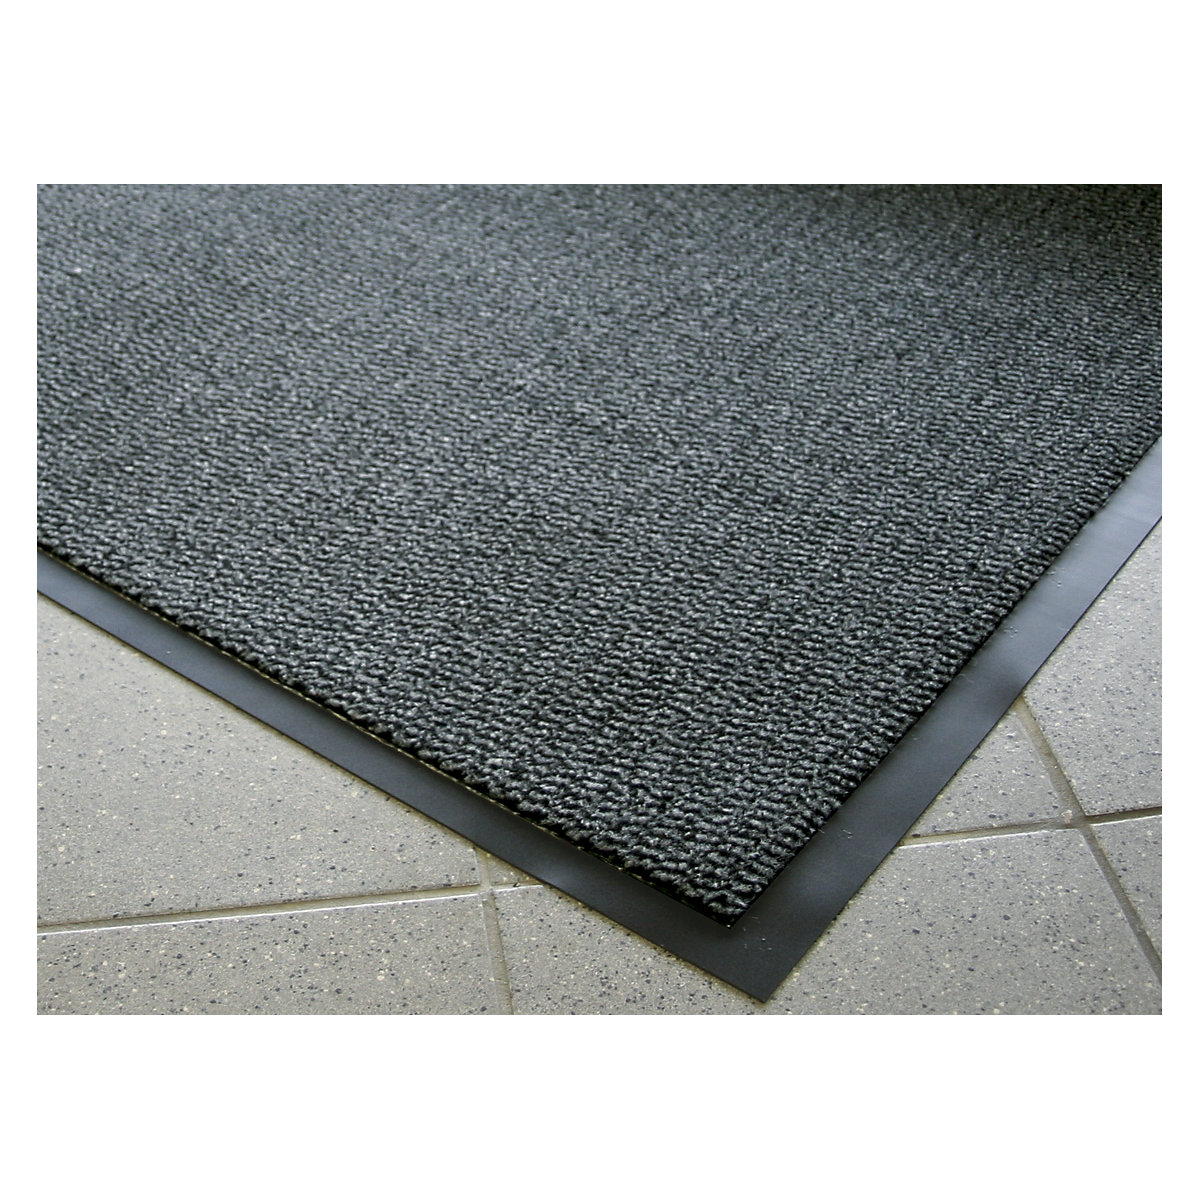 Entrance matting for indoor use, polypropylene pile, width 900 mm, sold by the metre, black / metallic